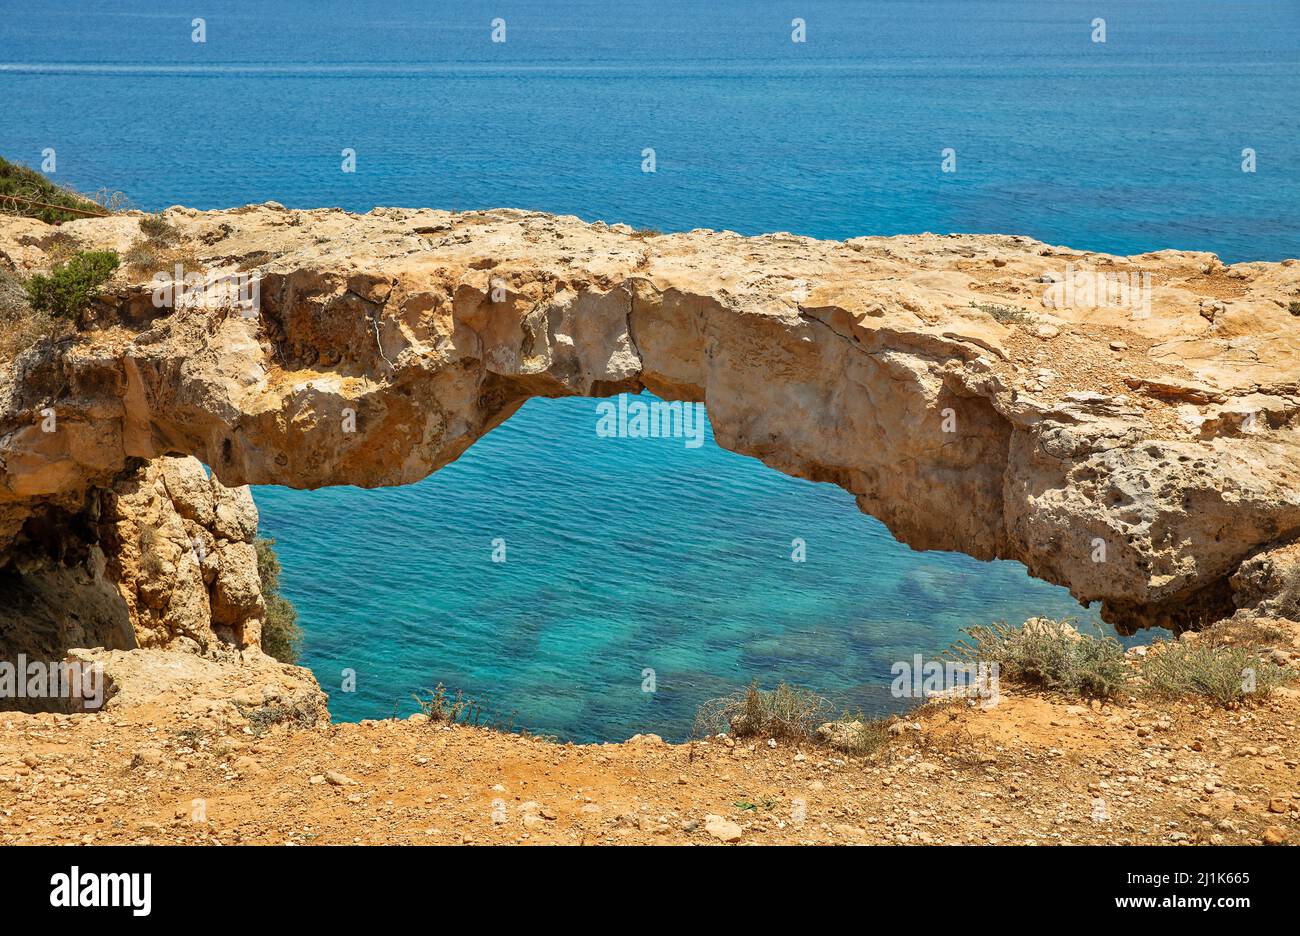 Seascape with Lovers' Bridge or Raven's Arch on Cape Greco peninsula park, Cyprus. It is mountainous peninsula with a national park, rock paths, a tur Stock Photo